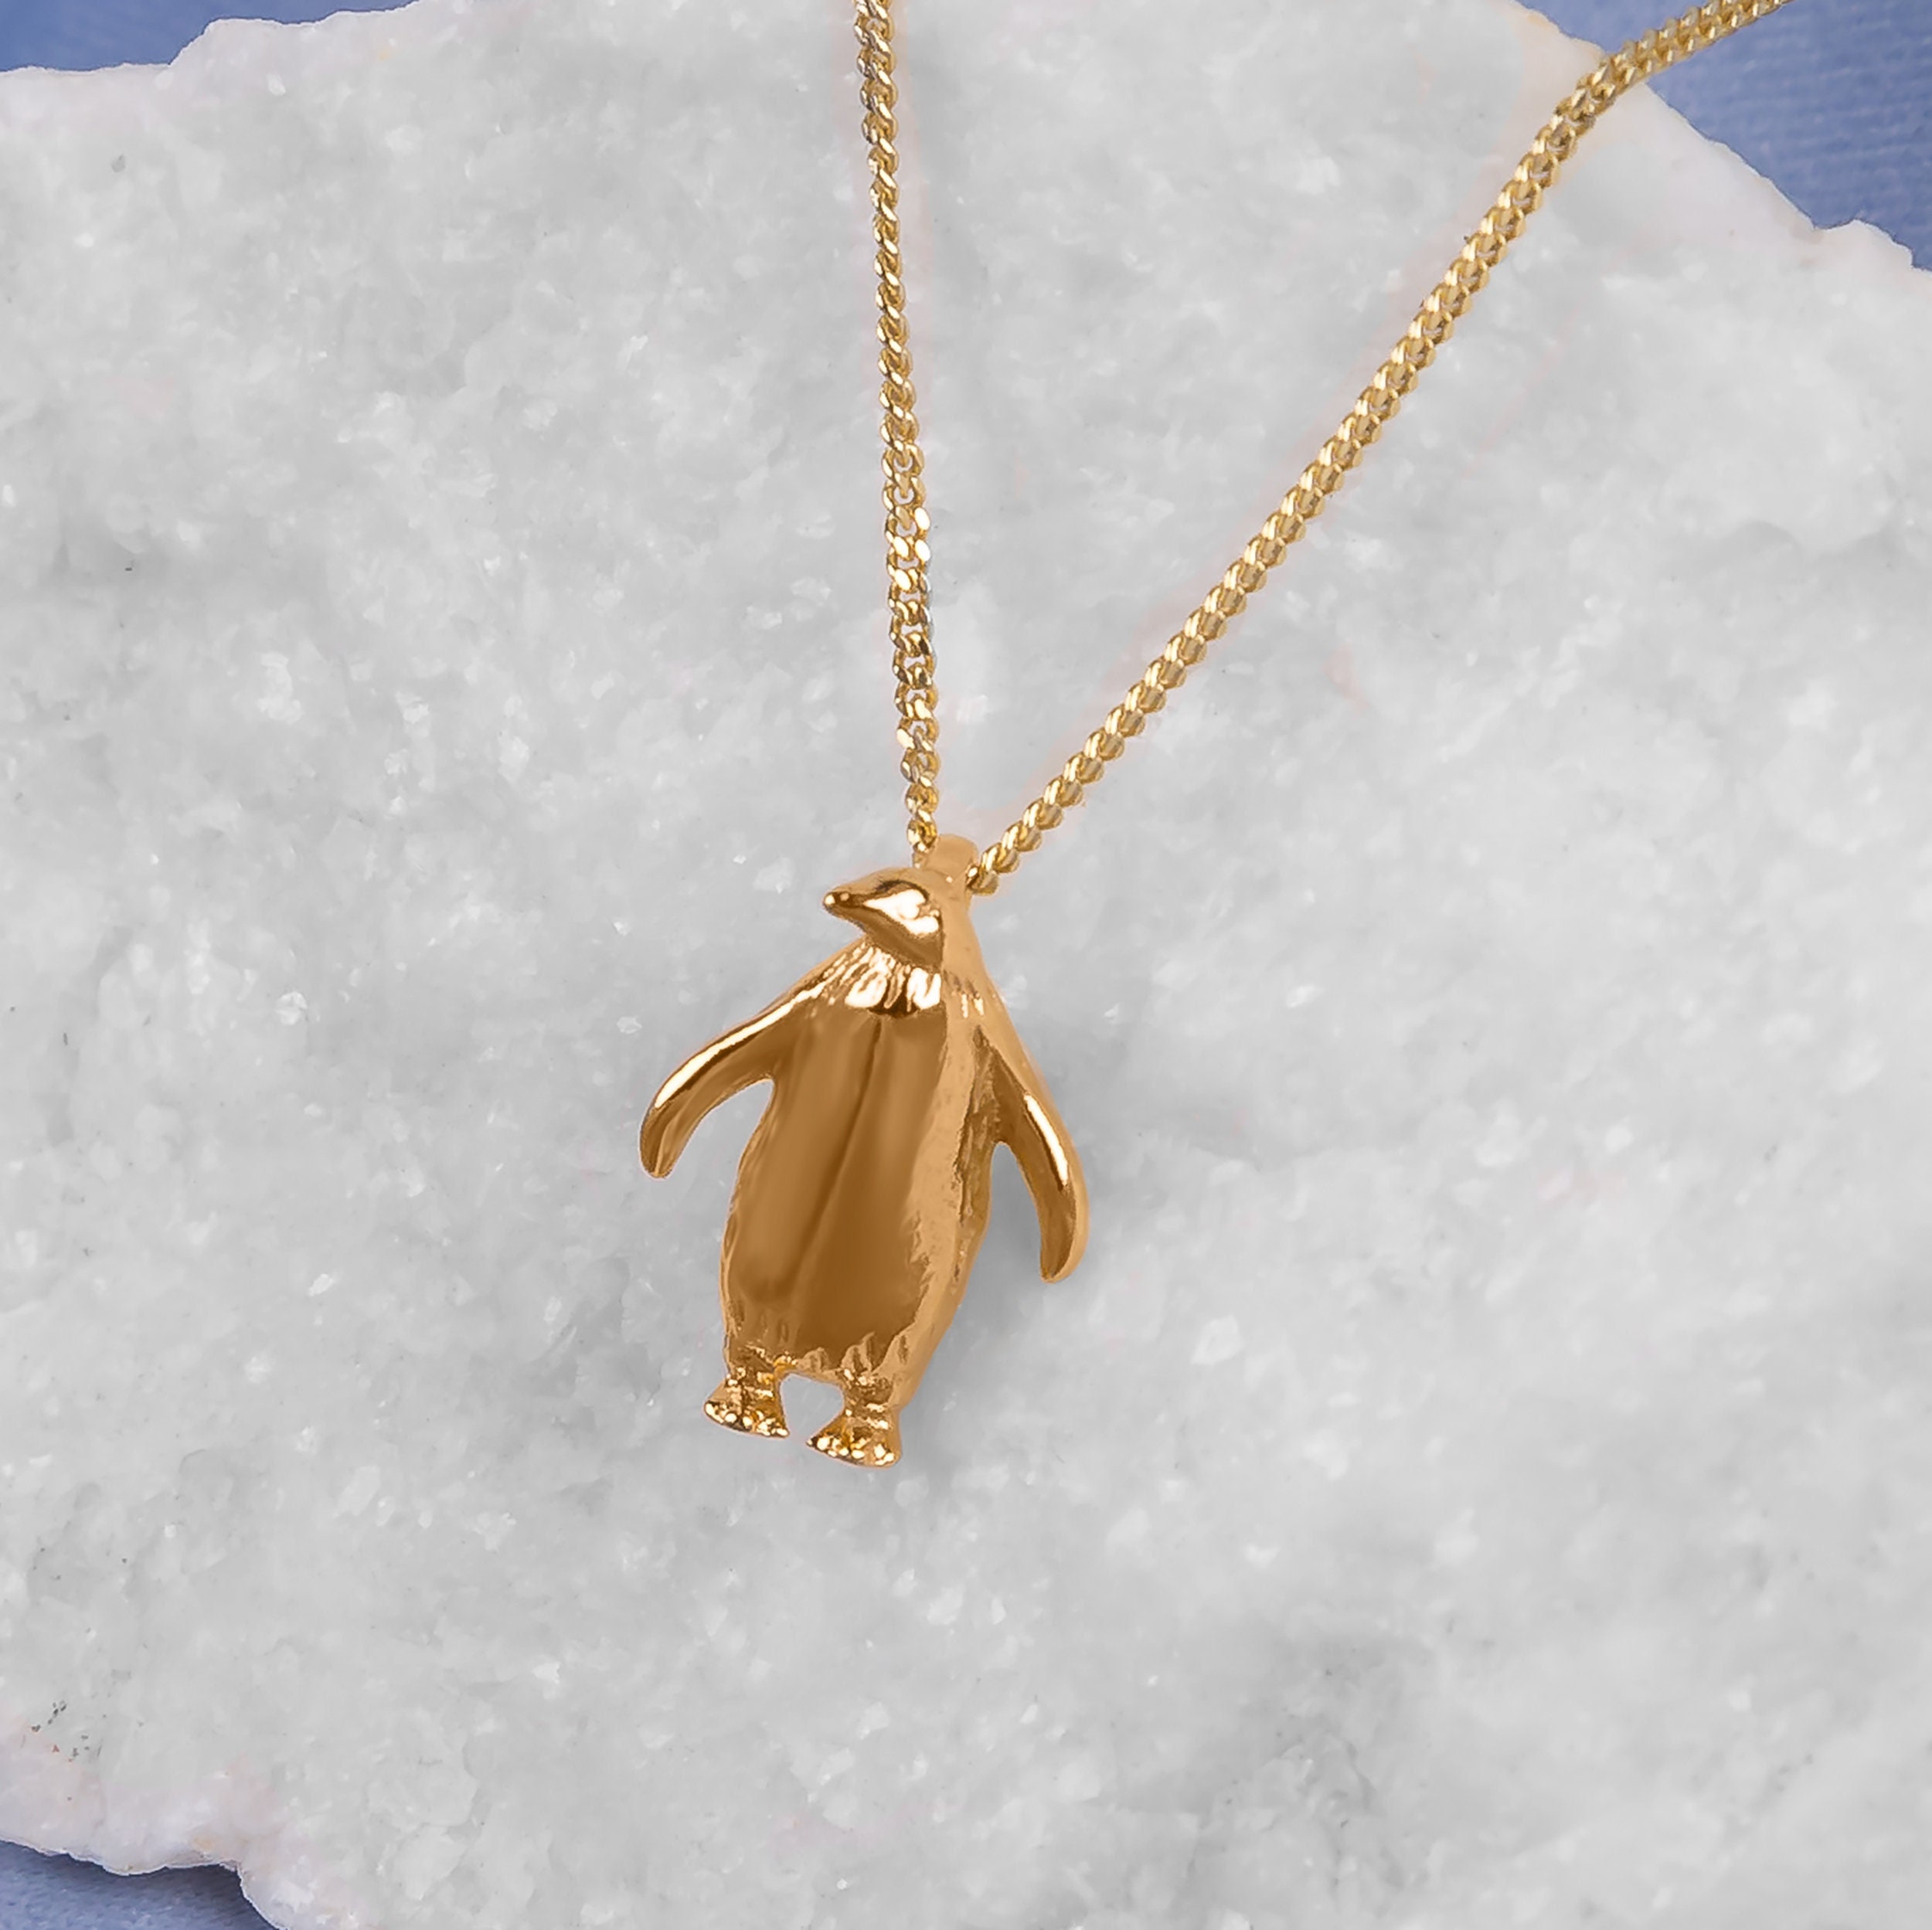 Buy Penguin Necklace Gold Online in India - Etsy